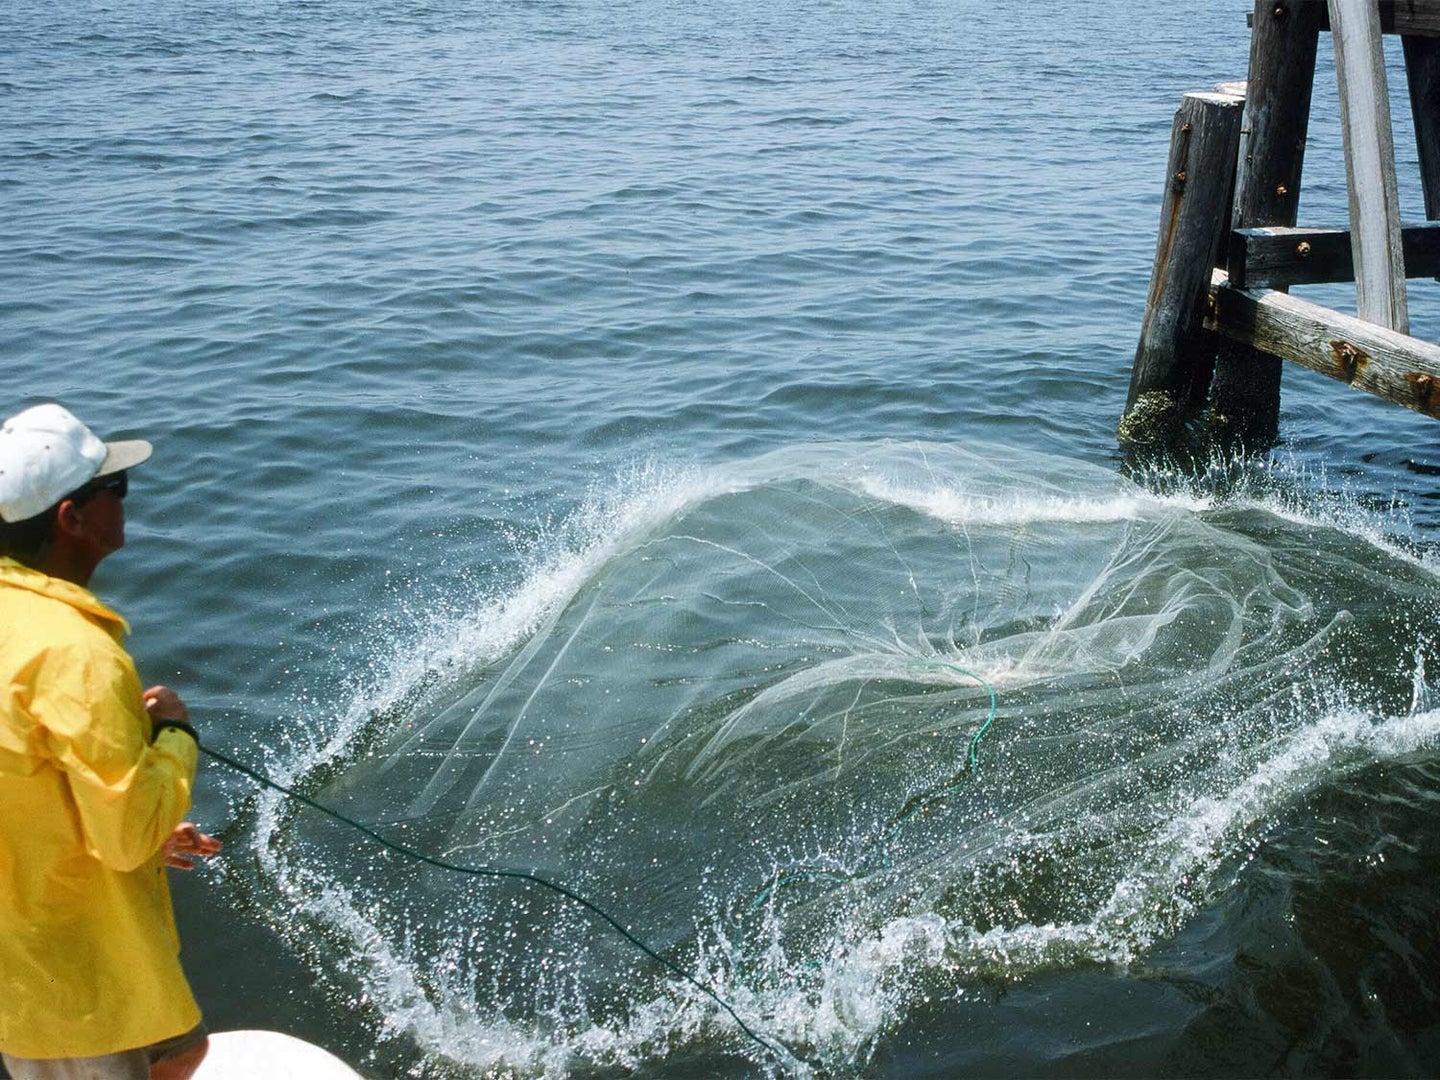 fisherman casting a net in the water